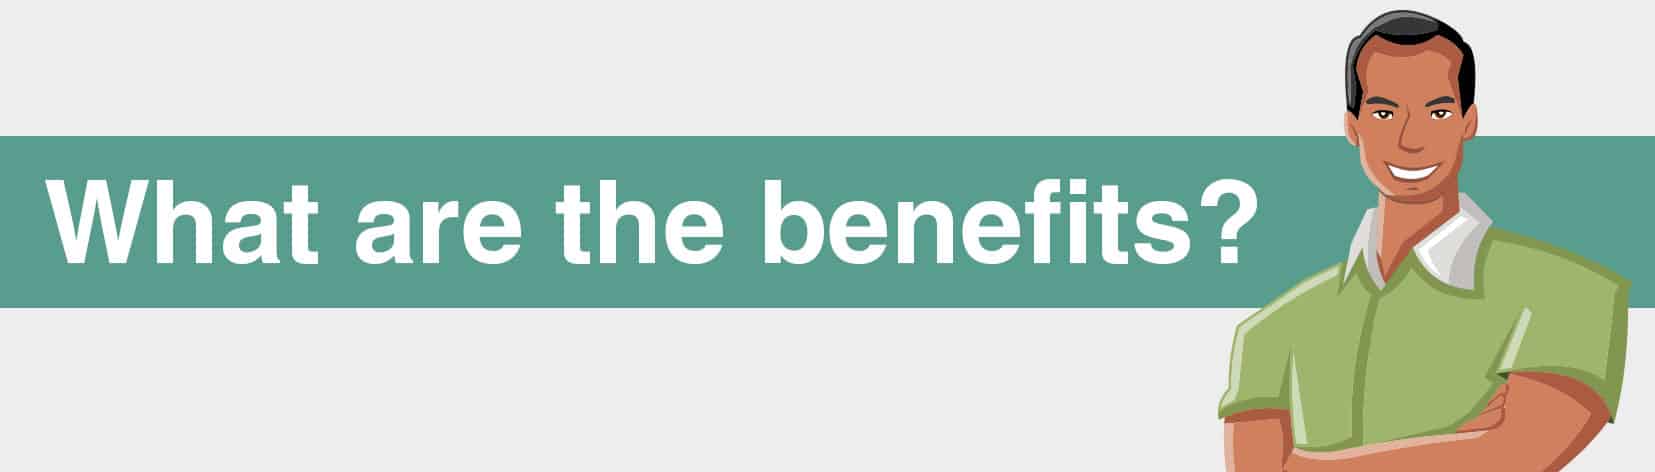 What-are-the-benefits